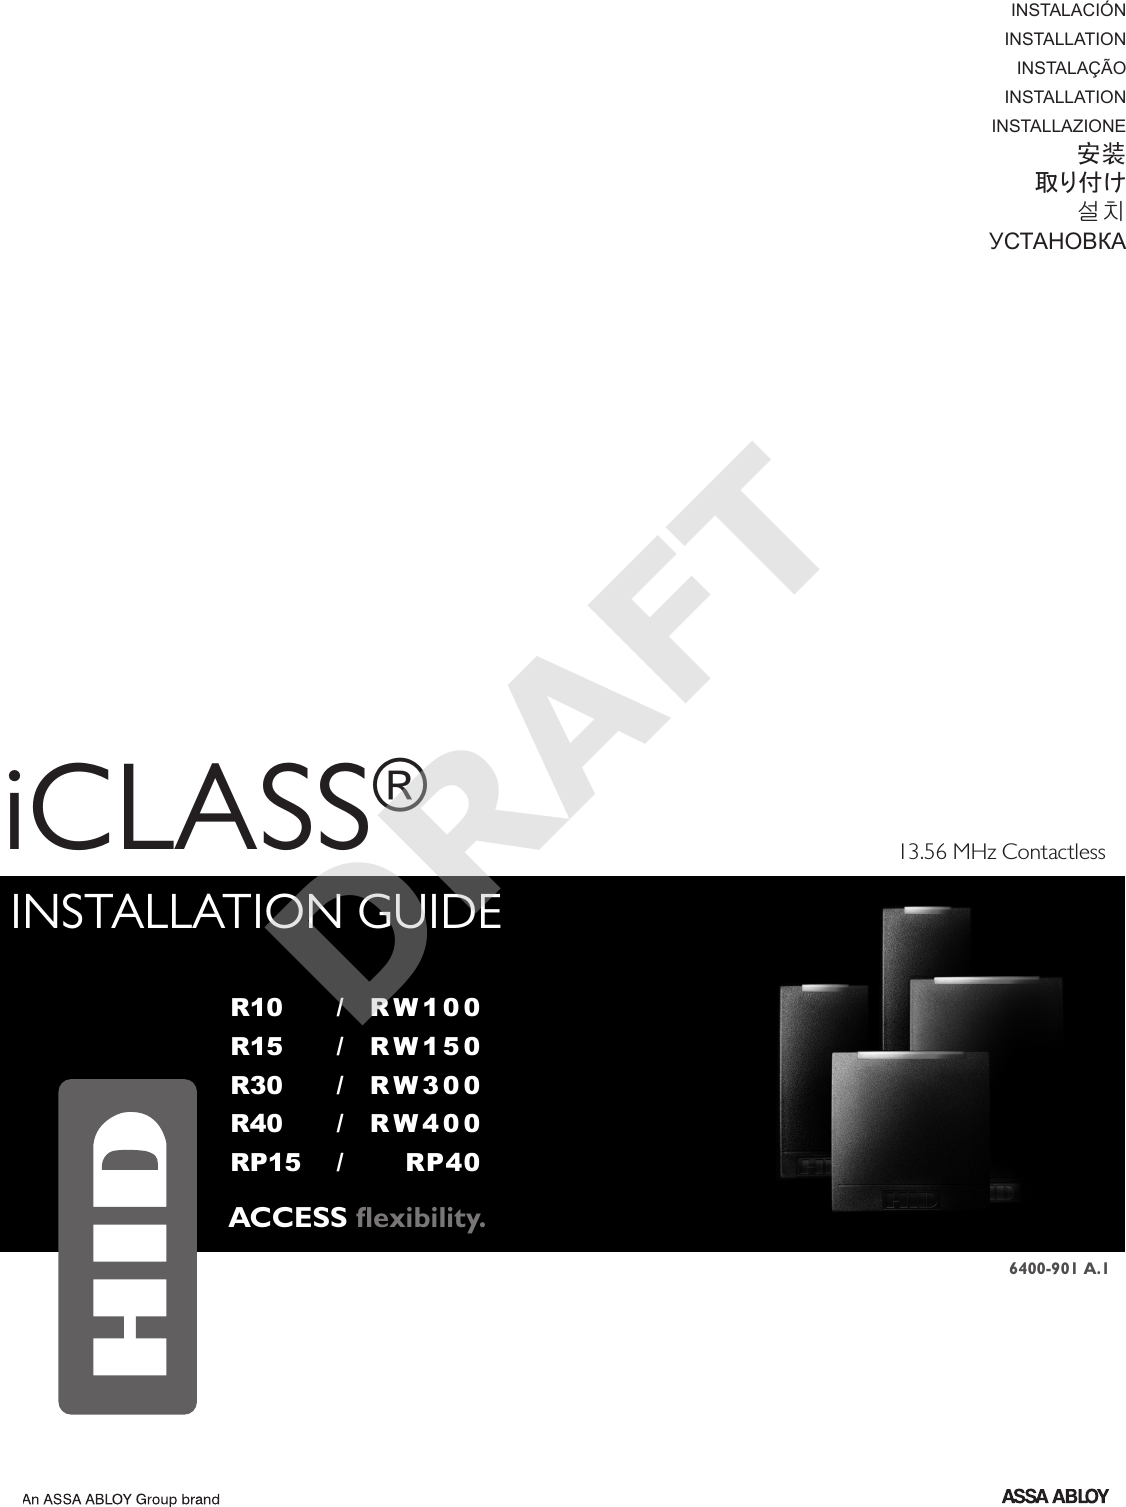 iCLASS®INSTALLATION GUIDEi n s t a l a c i ó ni n s t a l l a t i o ni n s t a l a ç ã oi n s t a l l a t i o ni n s t a l l a z i o n e安装取り付け설치R10  /  R W 1 0 0R15  /  R W 1 5 0R30  /  R W 3 0 0R40  /  R W 4 0 0RP15  /  RP40ACCESS ﬂexibility.13.56 MHz Contactless6400-901 A.1DRAFT